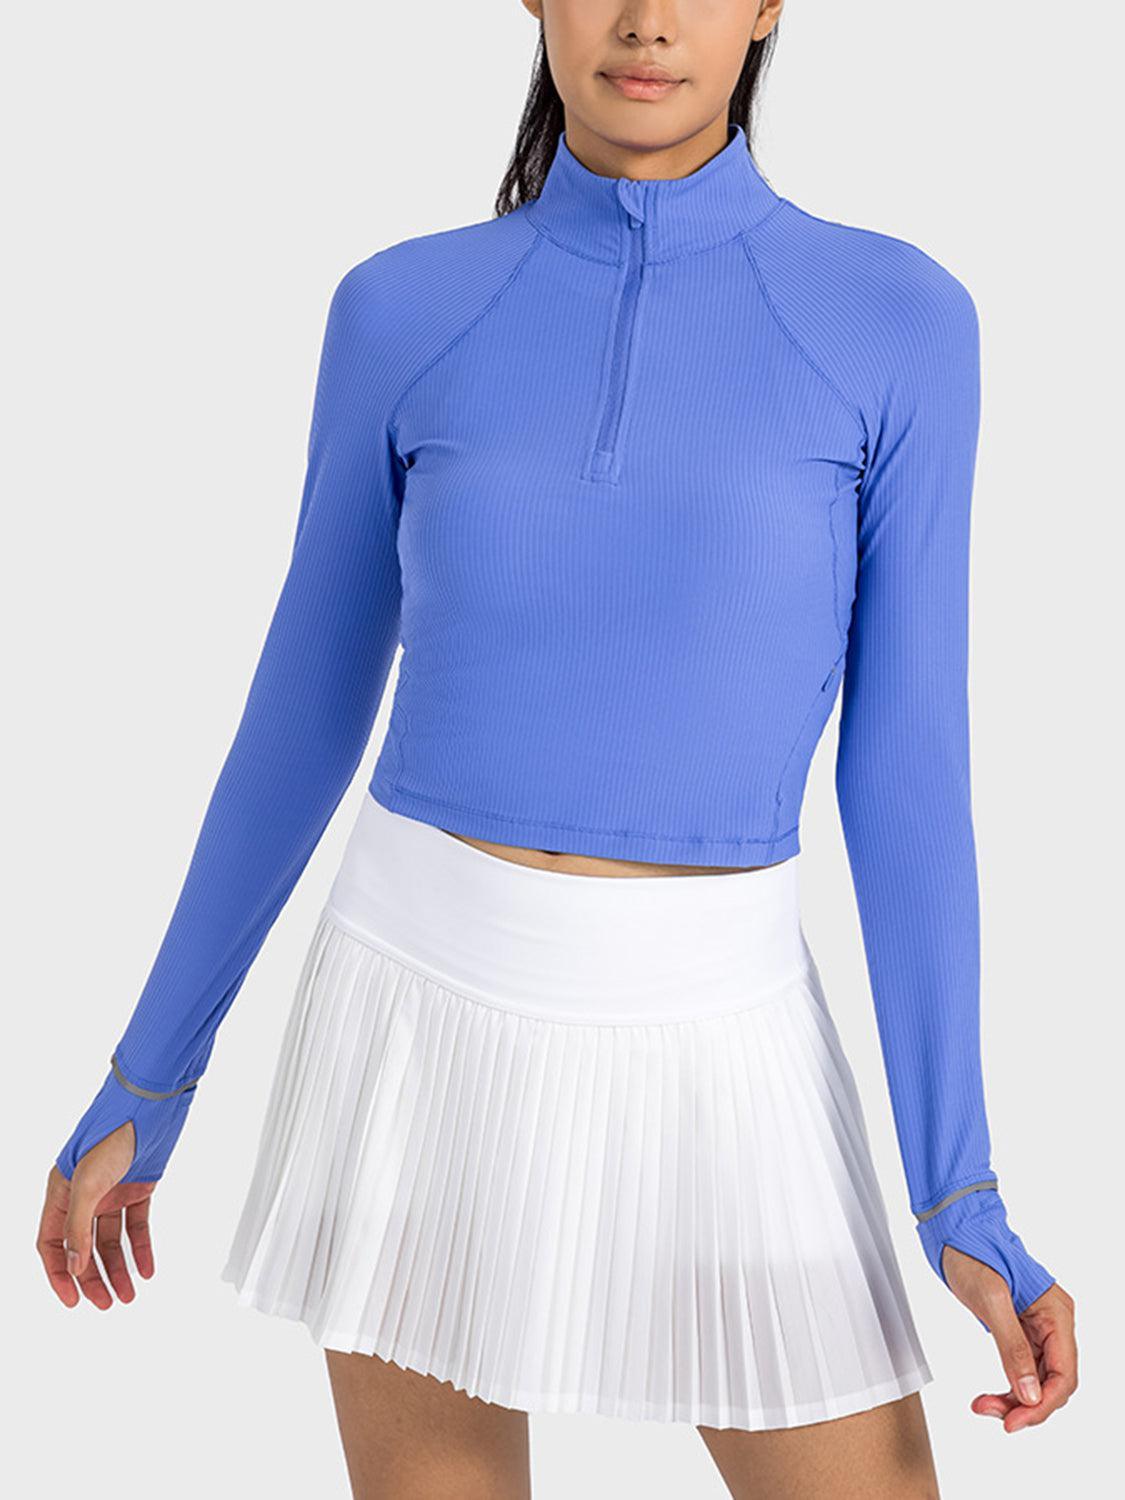 a woman in a blue top and white skirt